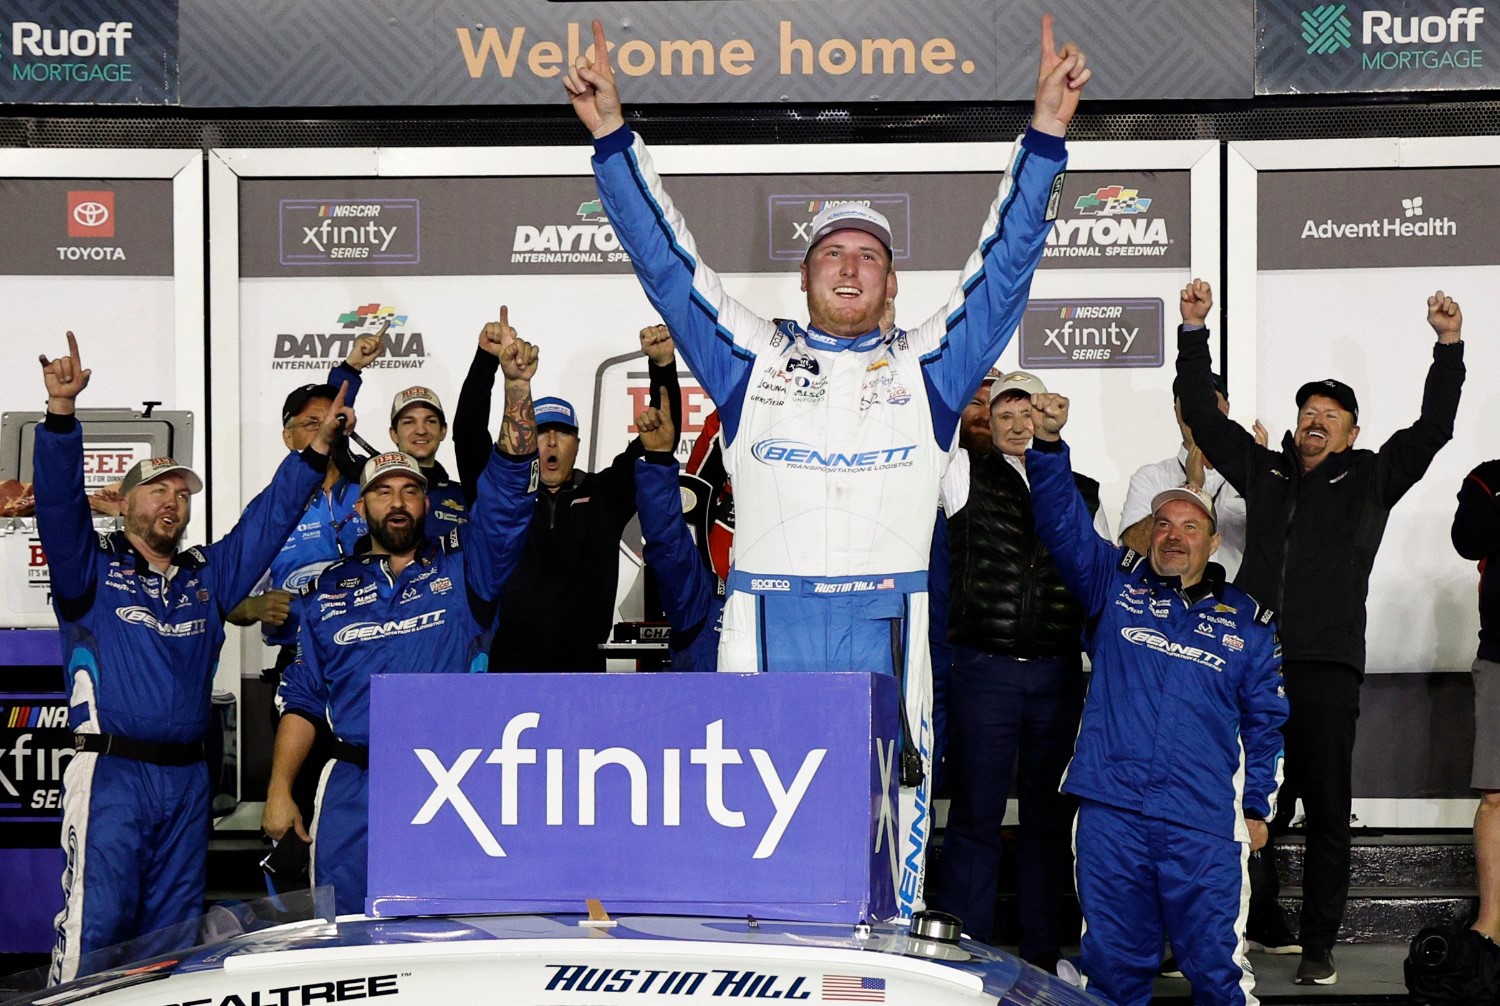 Austin Hill, driver of the #21 Bennett Transportation Chevrolet, celebrates in victory lane after winning the NASCAR Xfinity Series Beef. It's What's For Dinner. 300 at Daytona International Speedway on February 18, 2023 in Daytona Beach, Florida. (Photo by Chris Graythen/Getty Images)